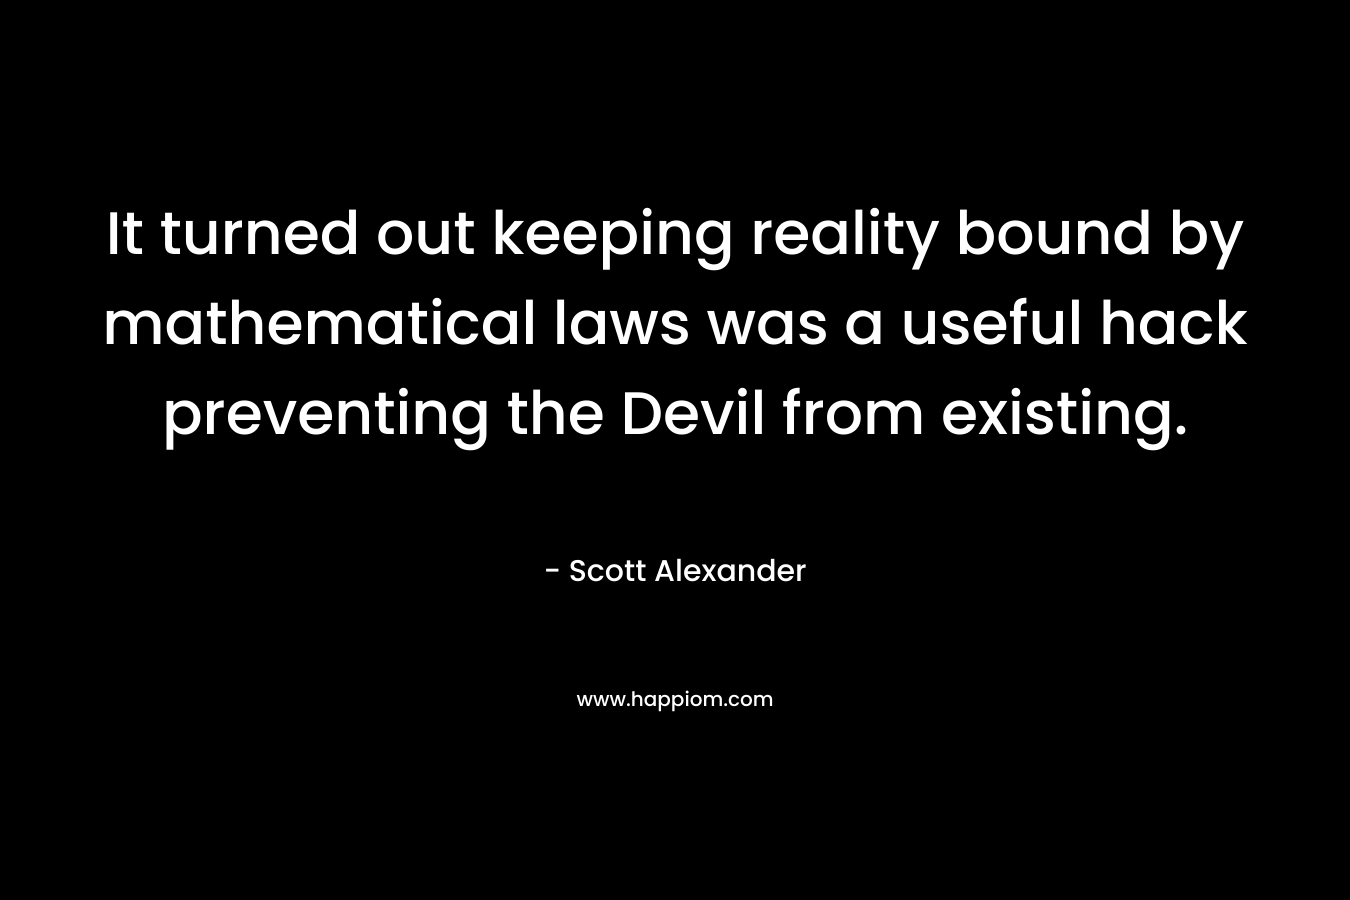 It turned out keeping reality bound by mathematical laws was a useful hack preventing the Devil from existing.